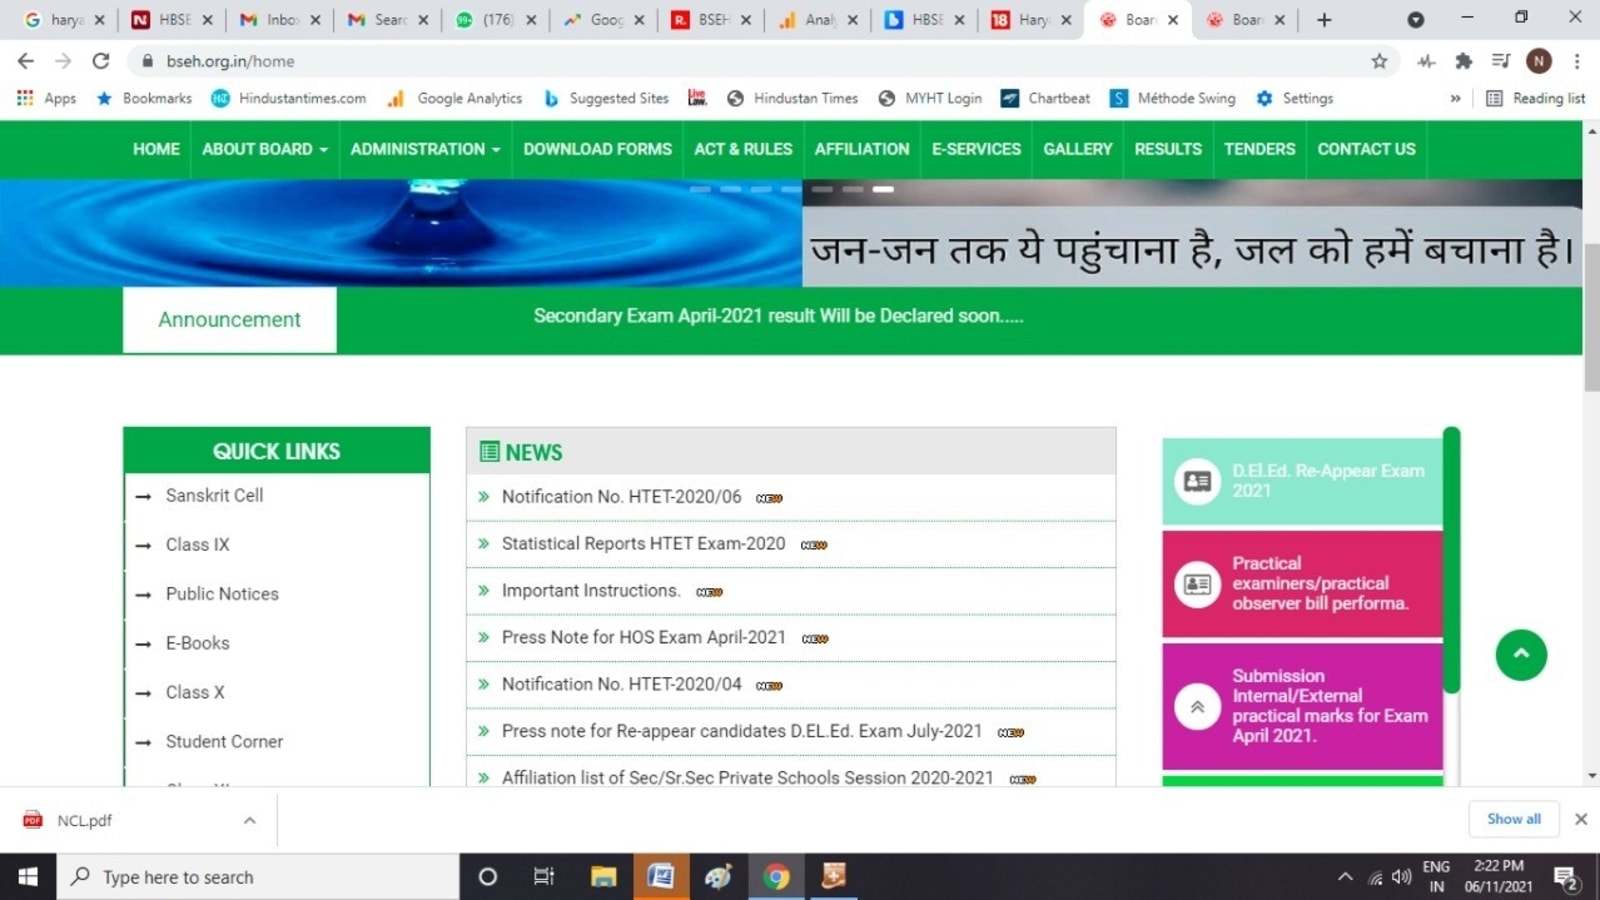 HBSE 10th Result 2021 LIVE Updates: Haryana 10th results soon at bseh.org.in